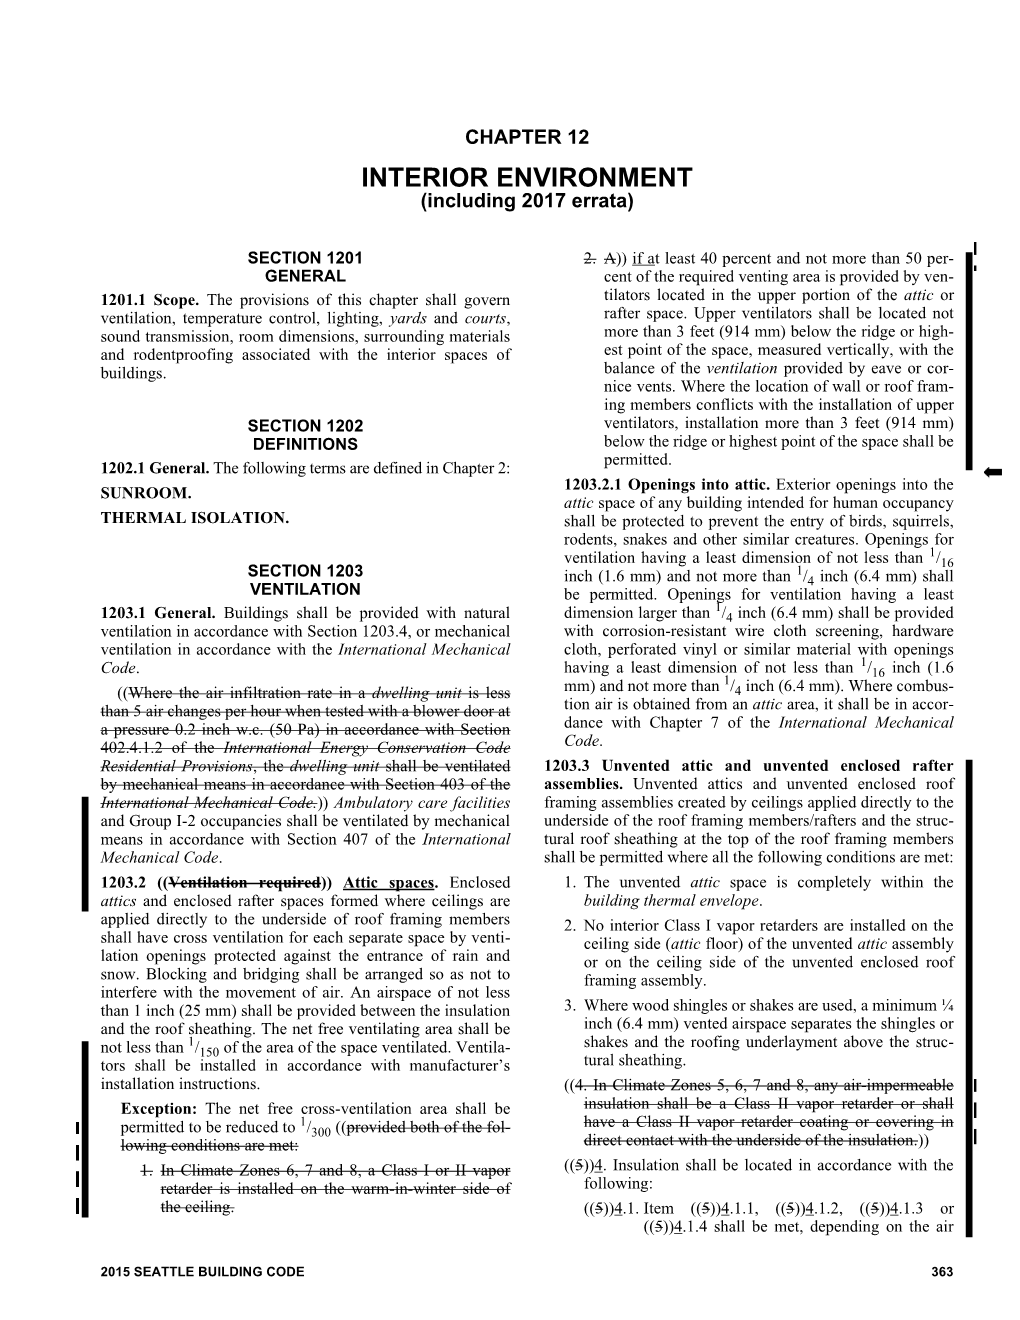 Seattle Building Code, Chapter 12, Interior Environment